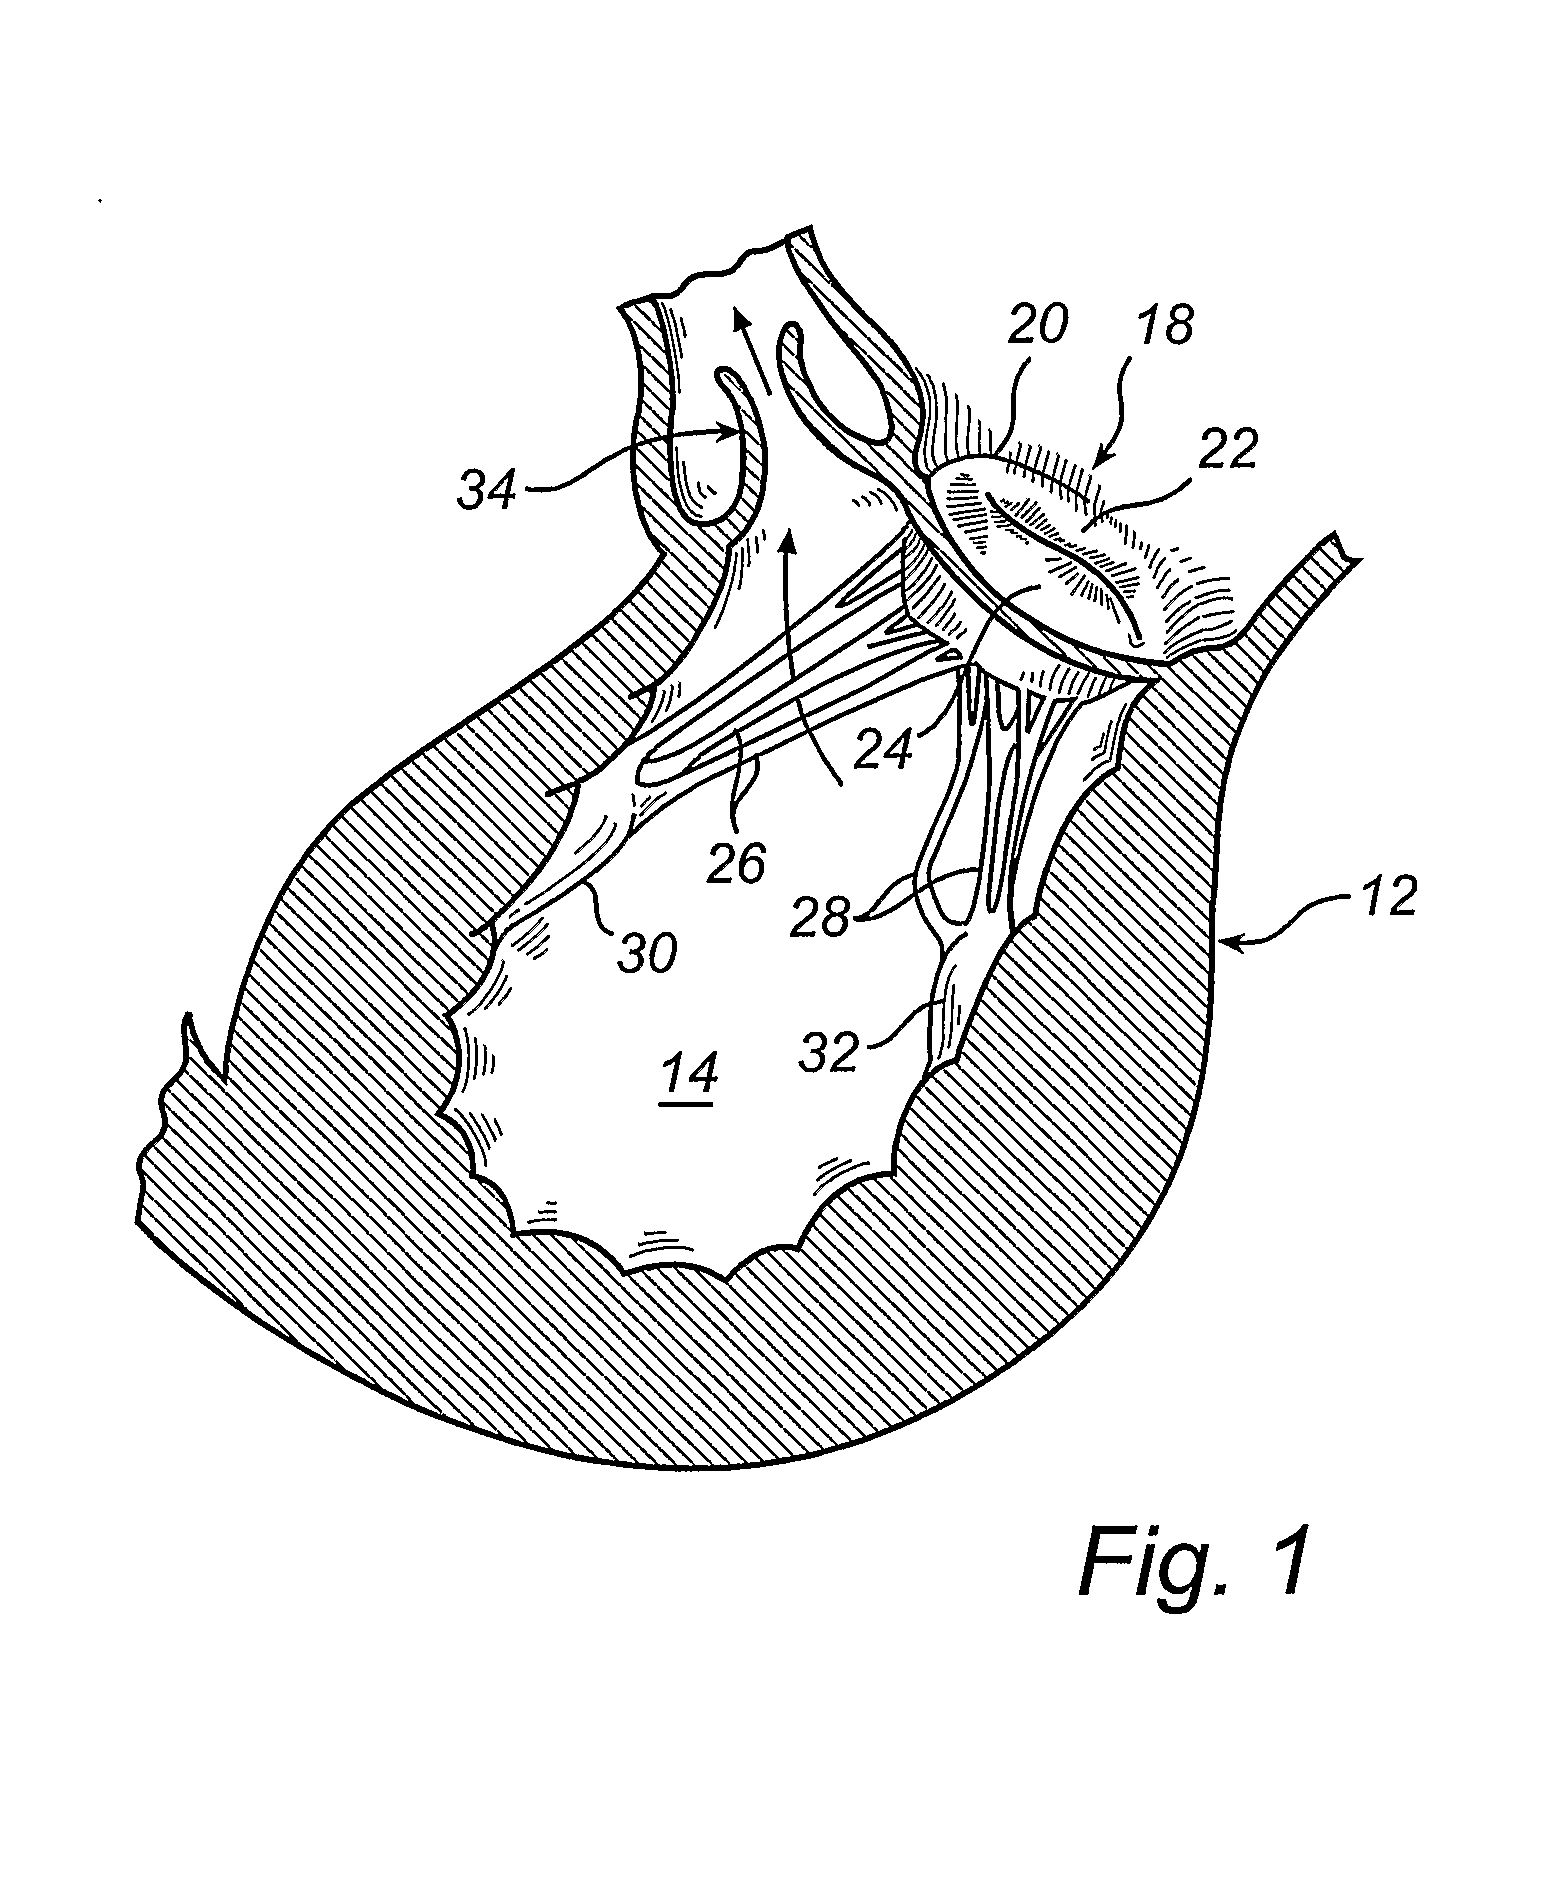 Device and Method for Improving the Function of a Heart Valve